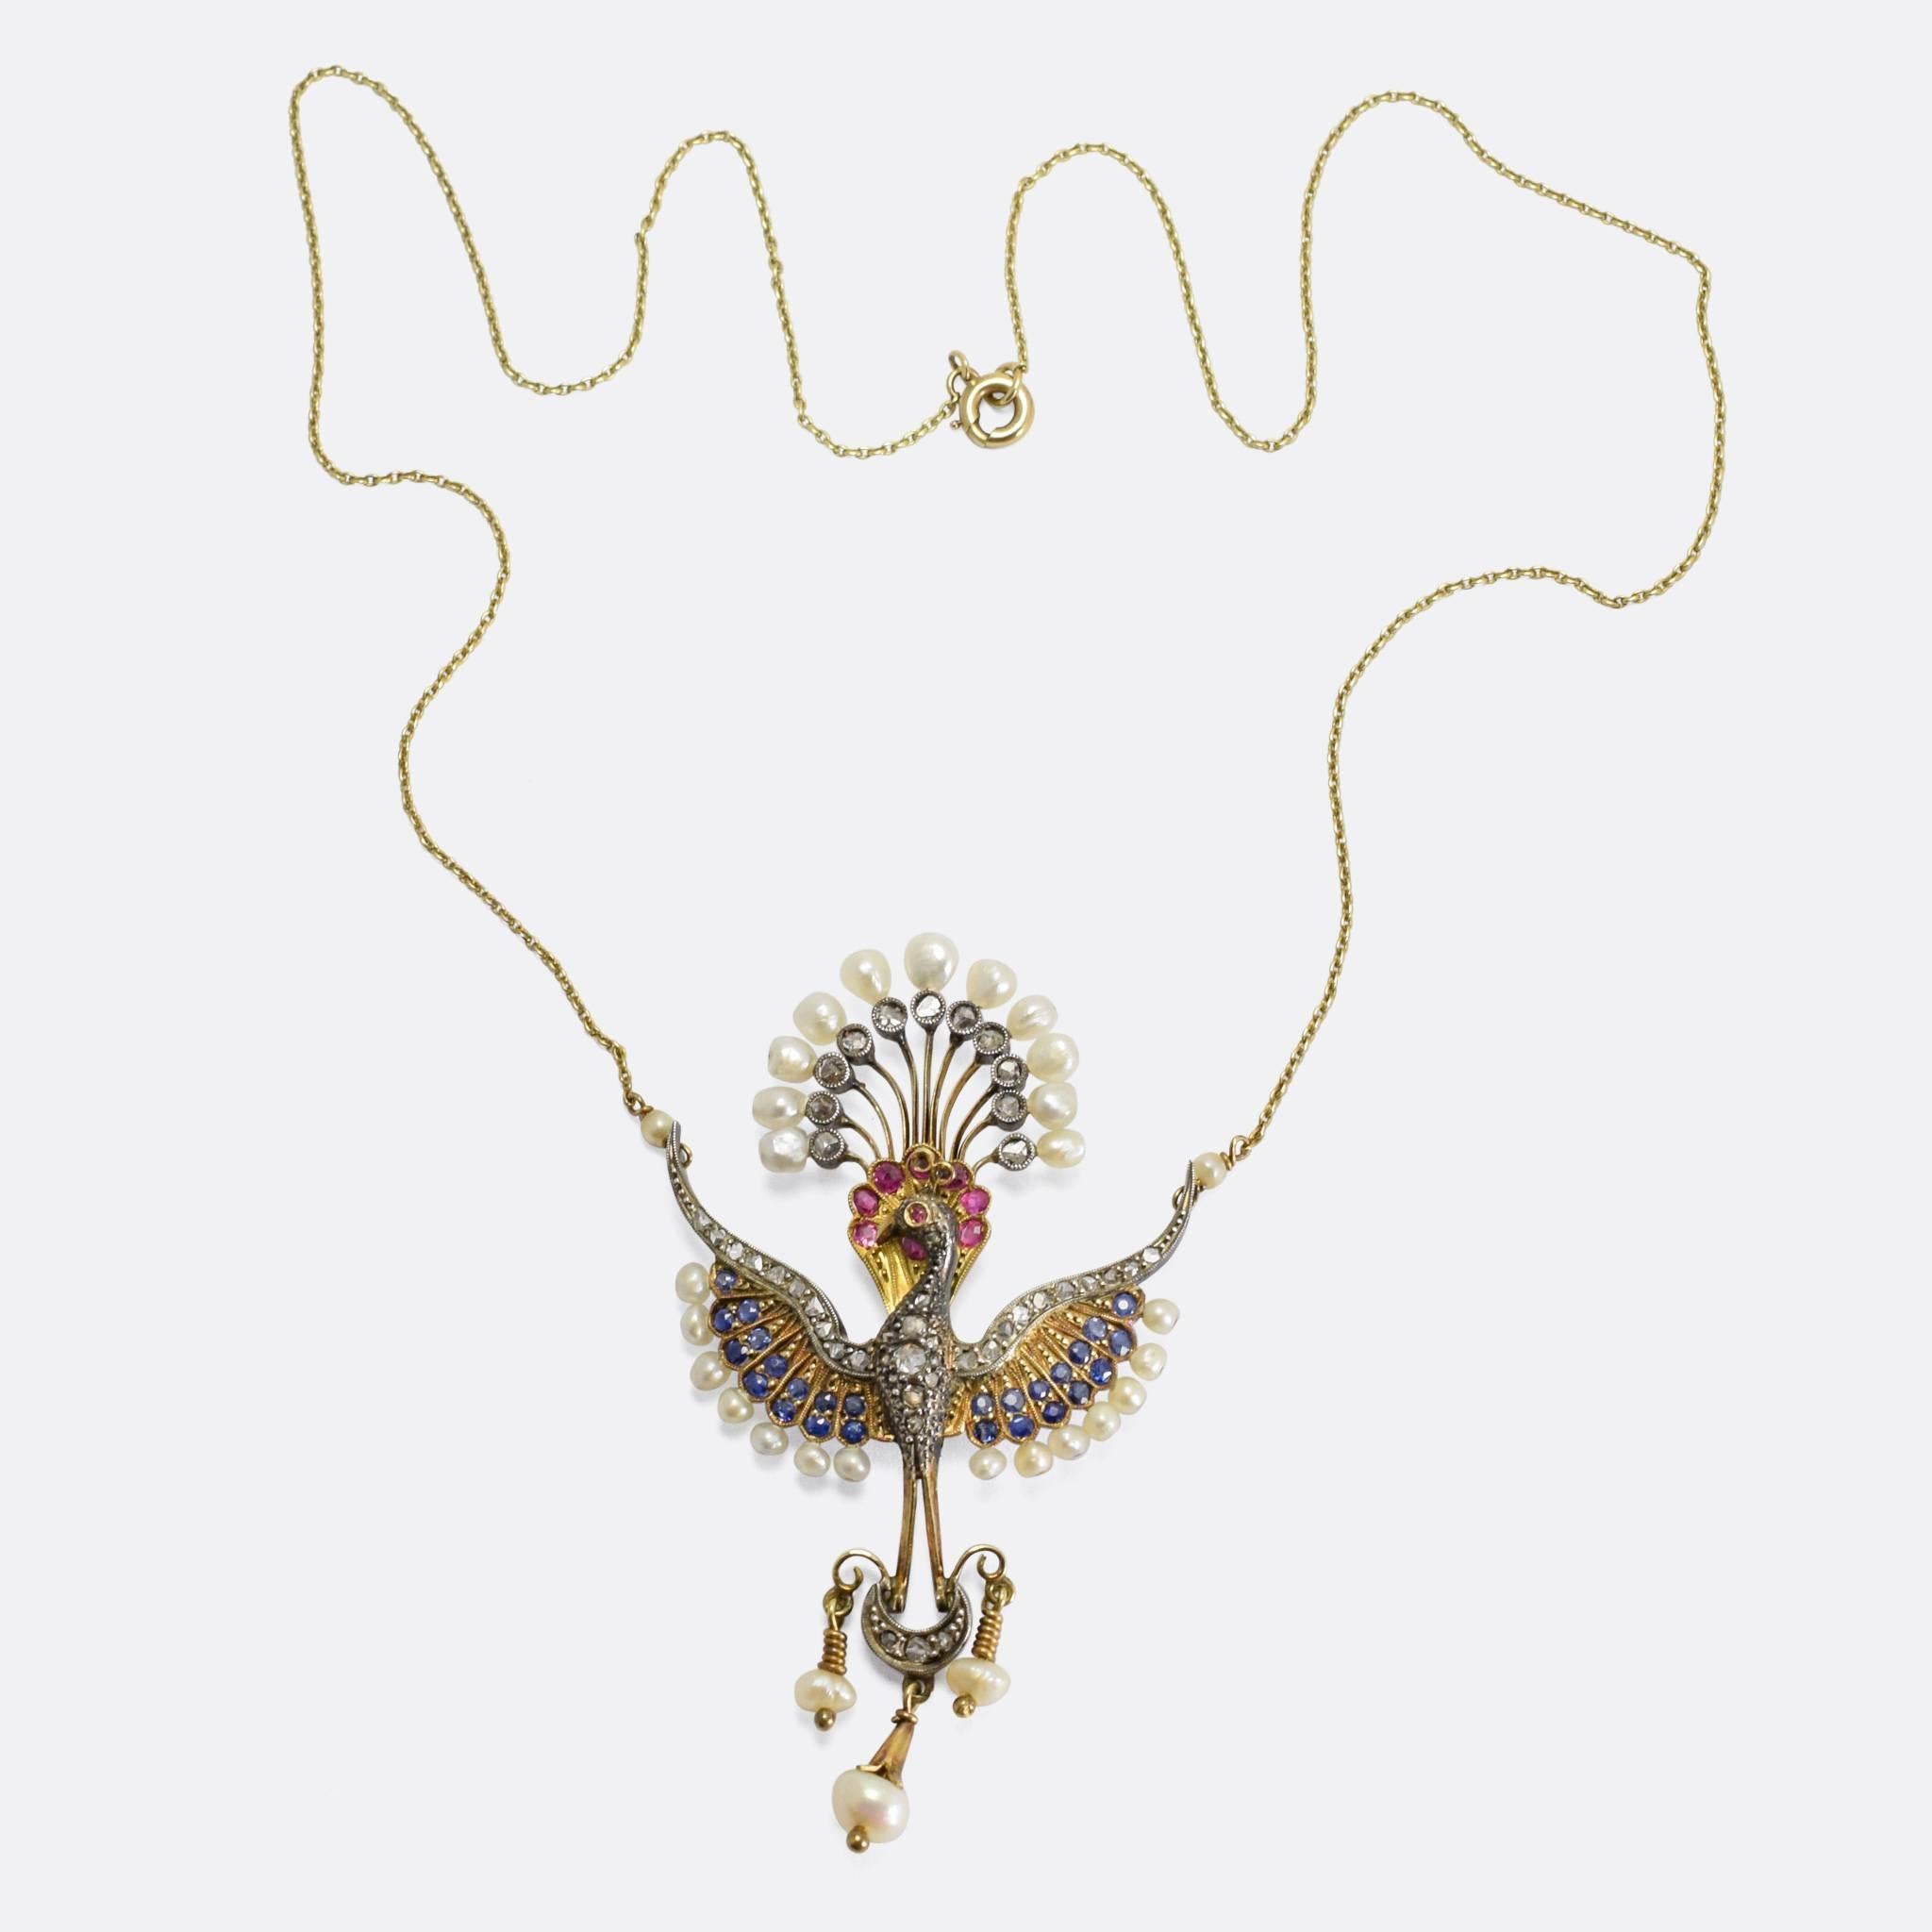 A truly stunning antique necklace modelled as a Peacock in full display. It’s set with a combination of diamonds, blue sapphires, rubies, and baroque pearls – the gemstones rest in silver millegrain settings, and the piece is modelled in 18k gold